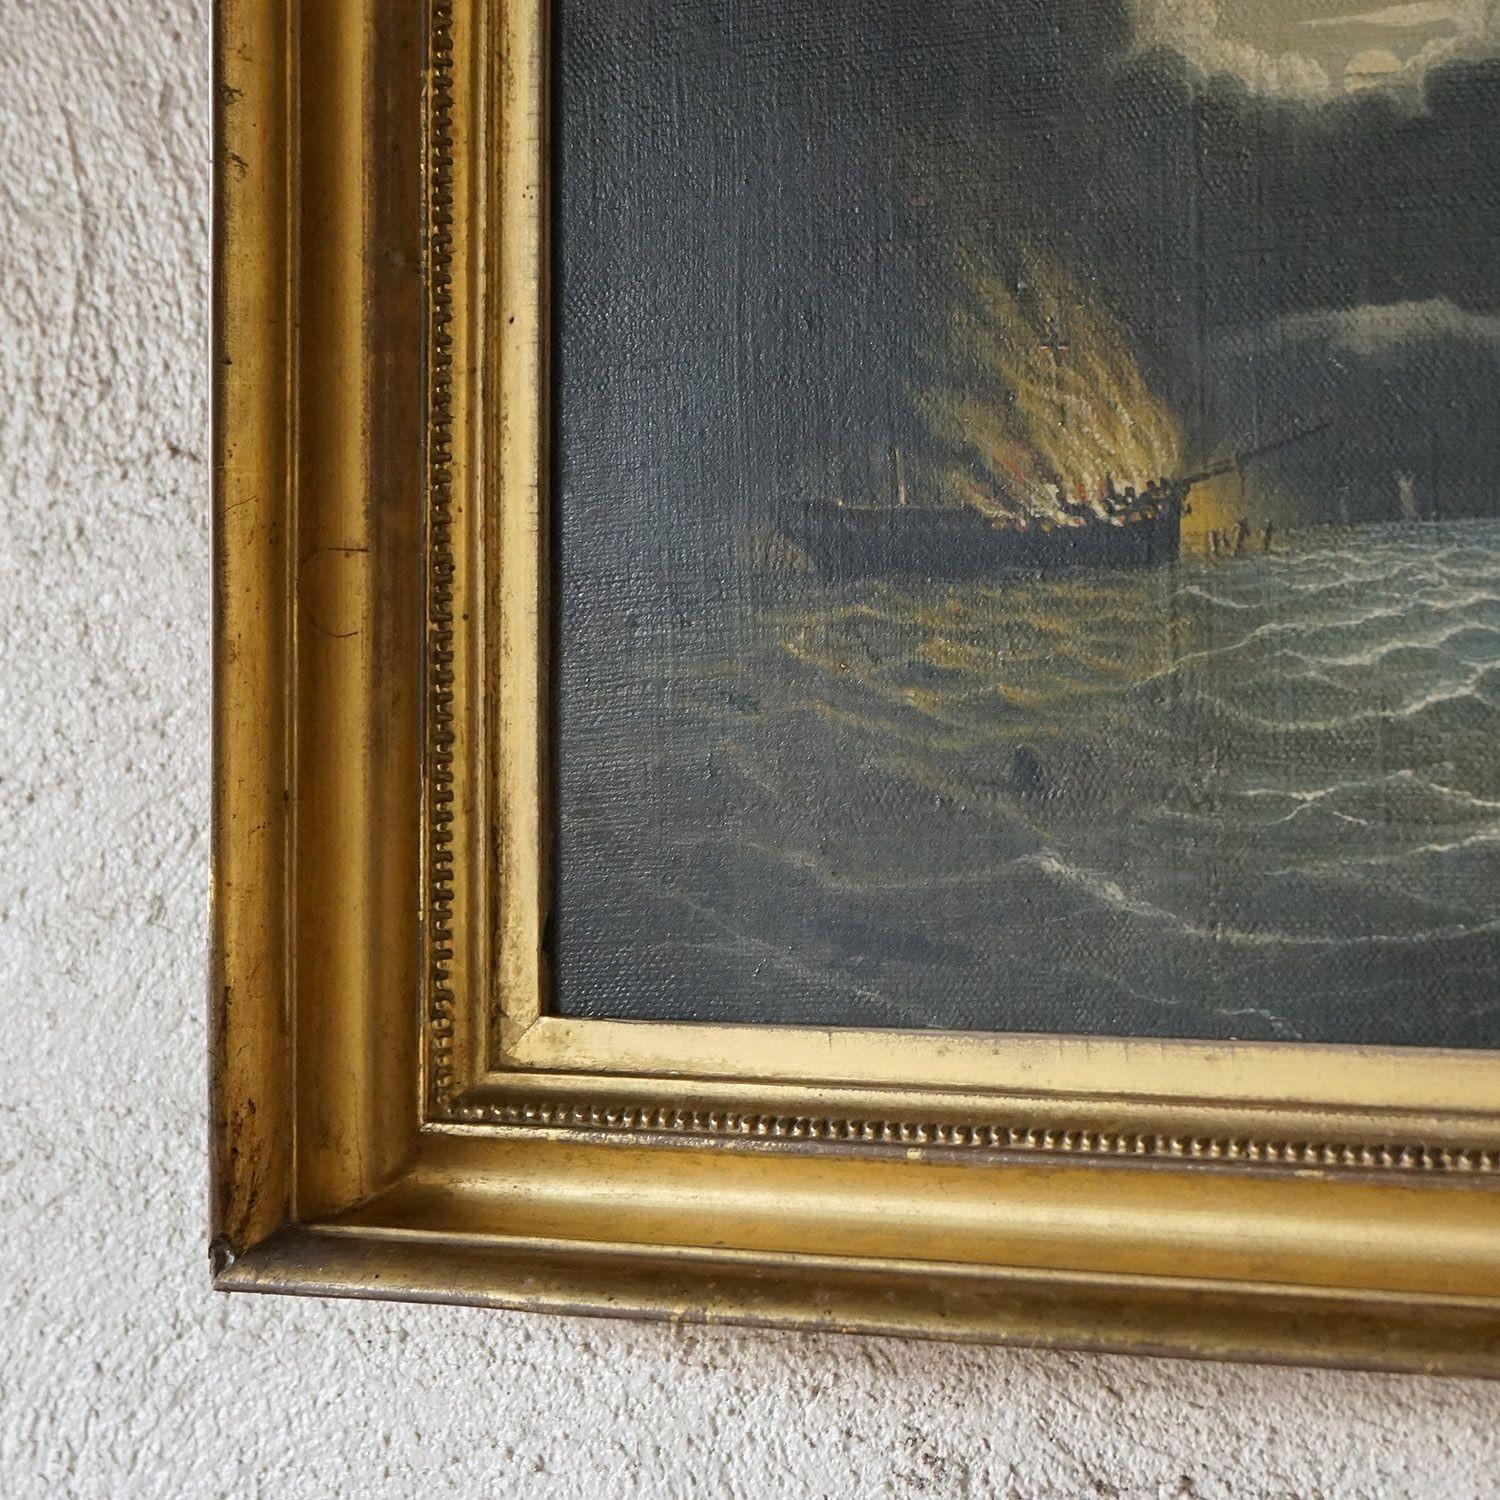 Seascape Depicting a Burning Ship, Antique Original Oil on Canvas Painting 1